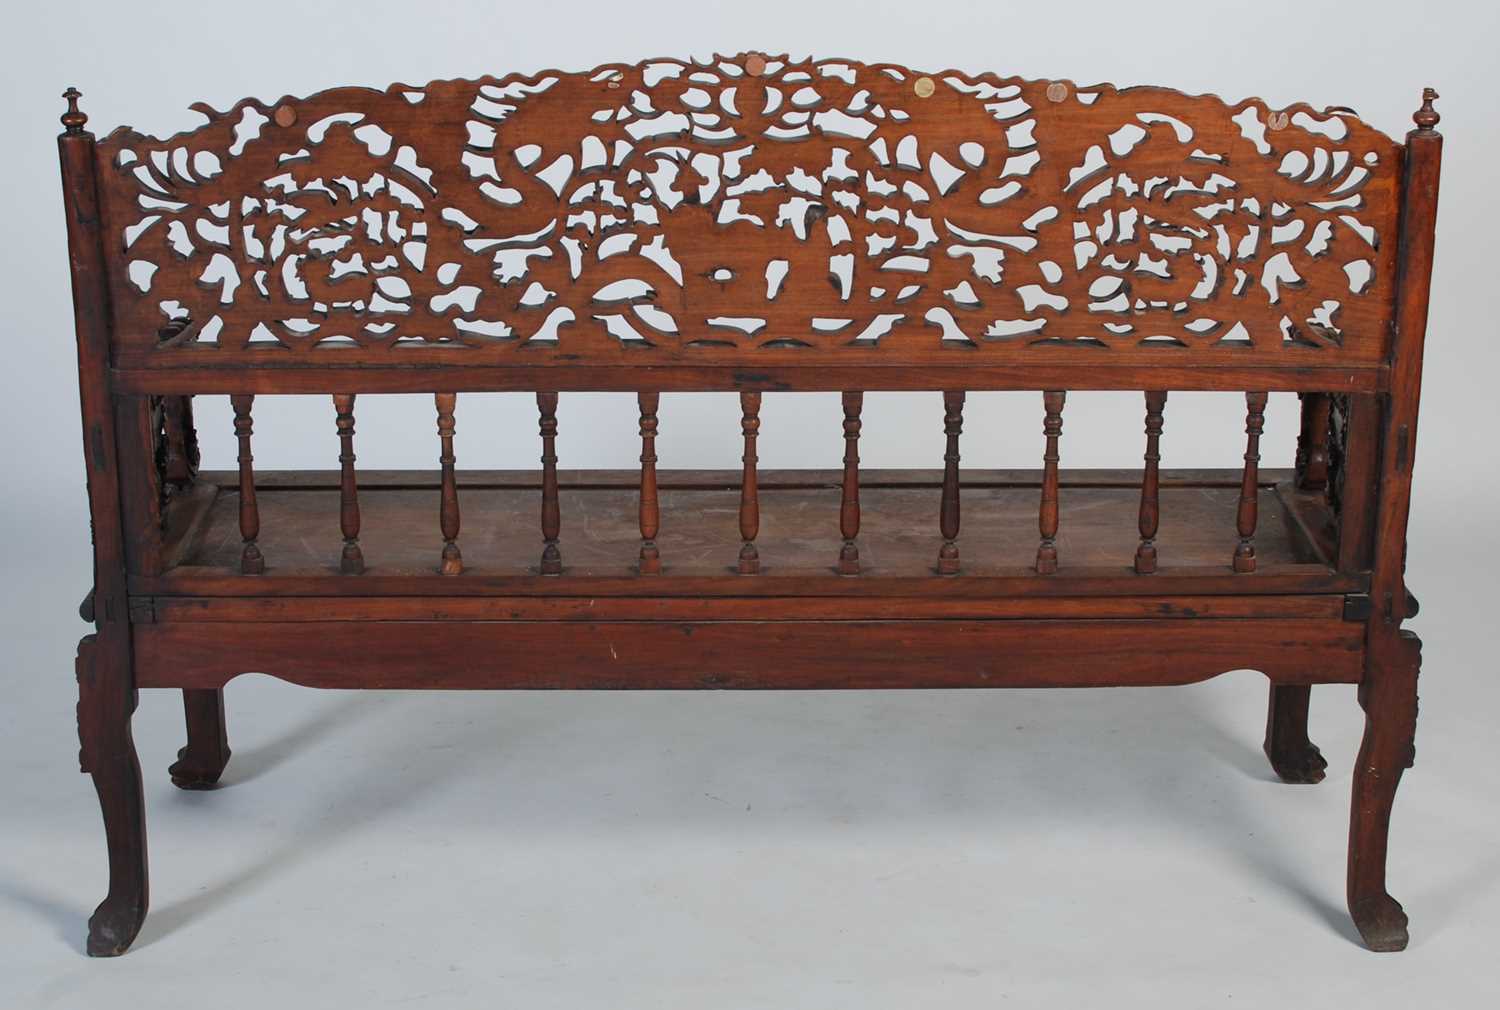 A Chinese dark wood bench, late 19th/ early 20th century, the rectangular back carved and pierced - Image 6 of 6